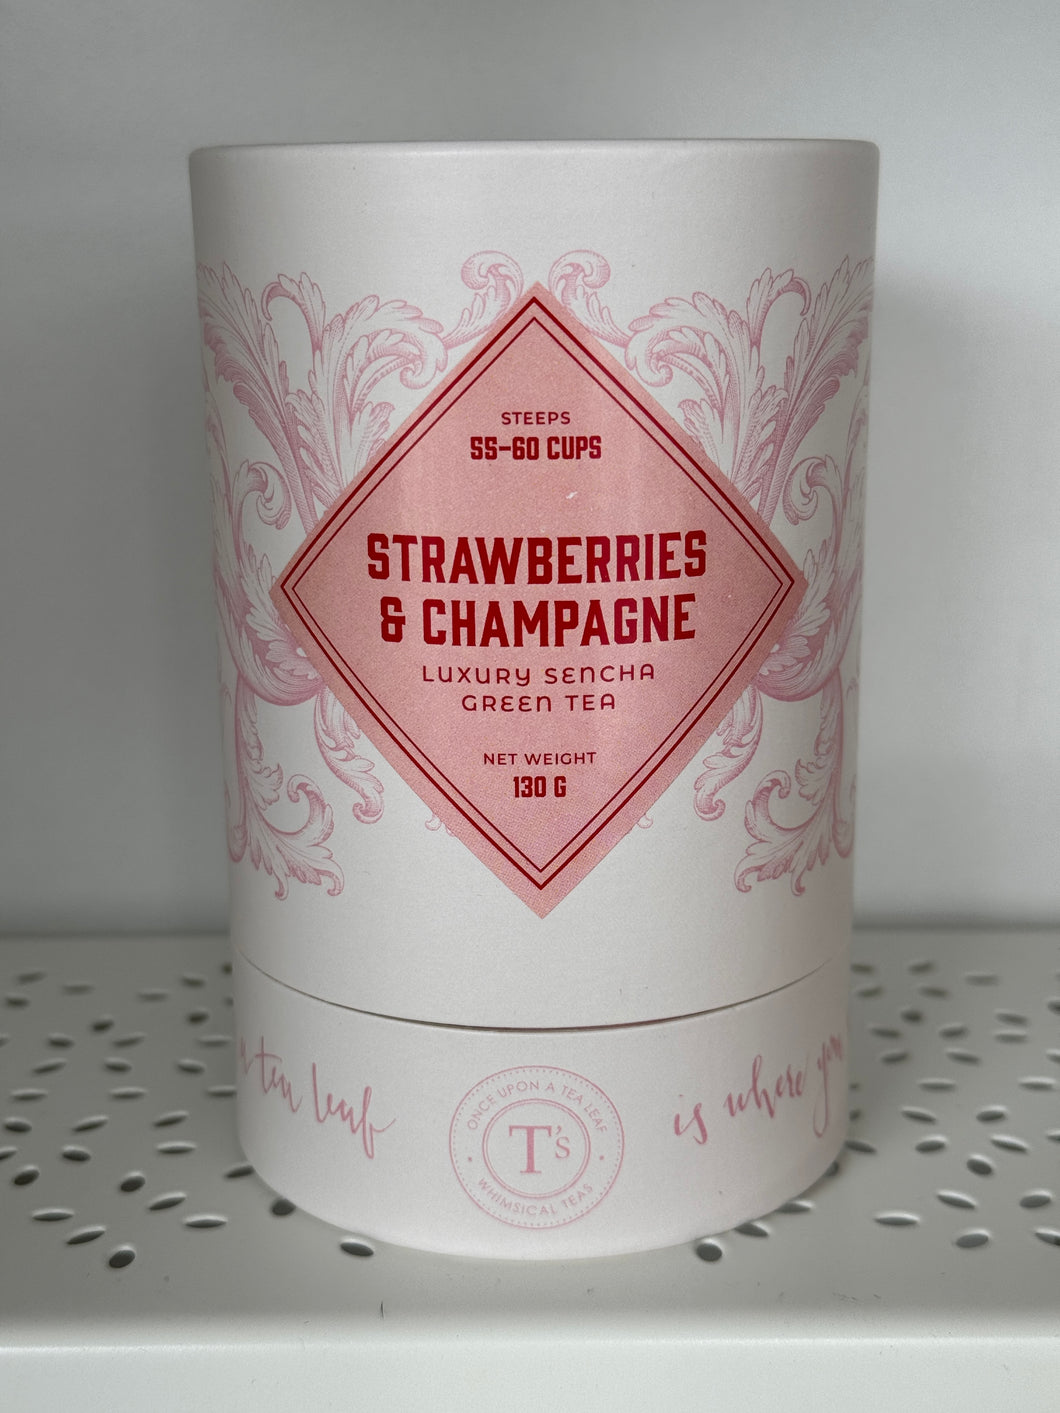 Once Upon a Tea Leaf - Strawberries & Champagne